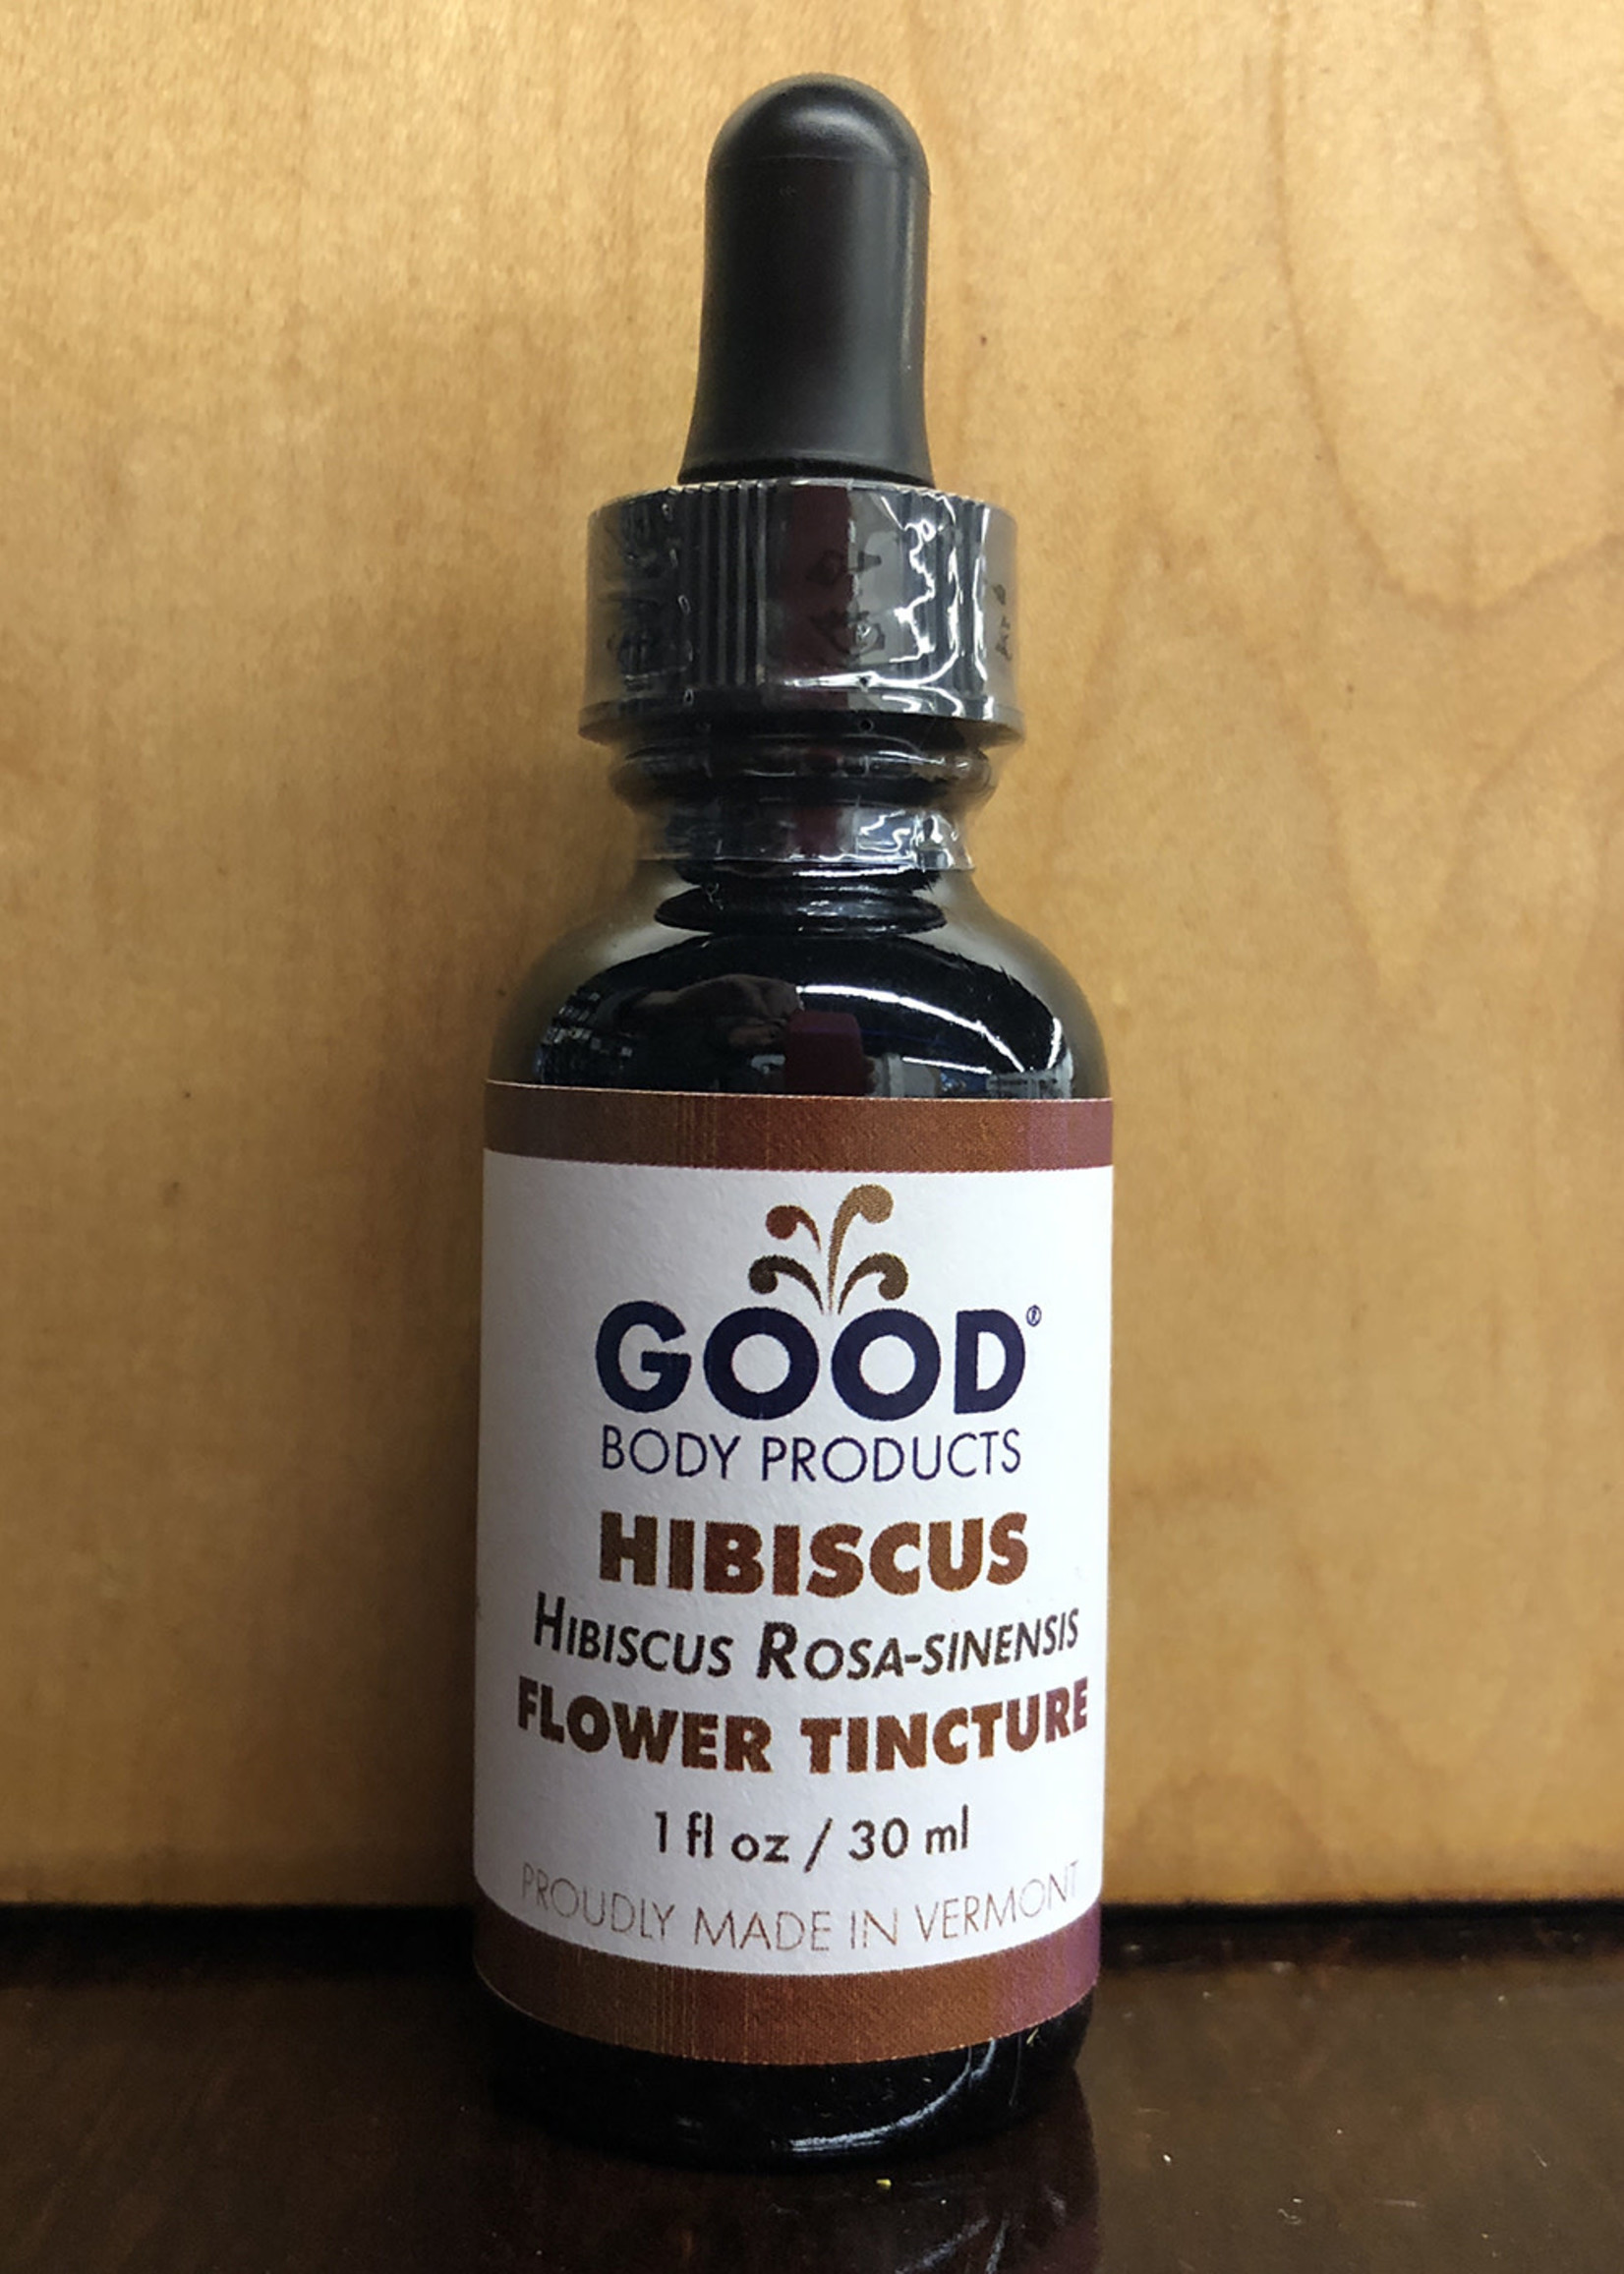 Good Body Products GBP, Hibiscus Flower Tincture, 1oz